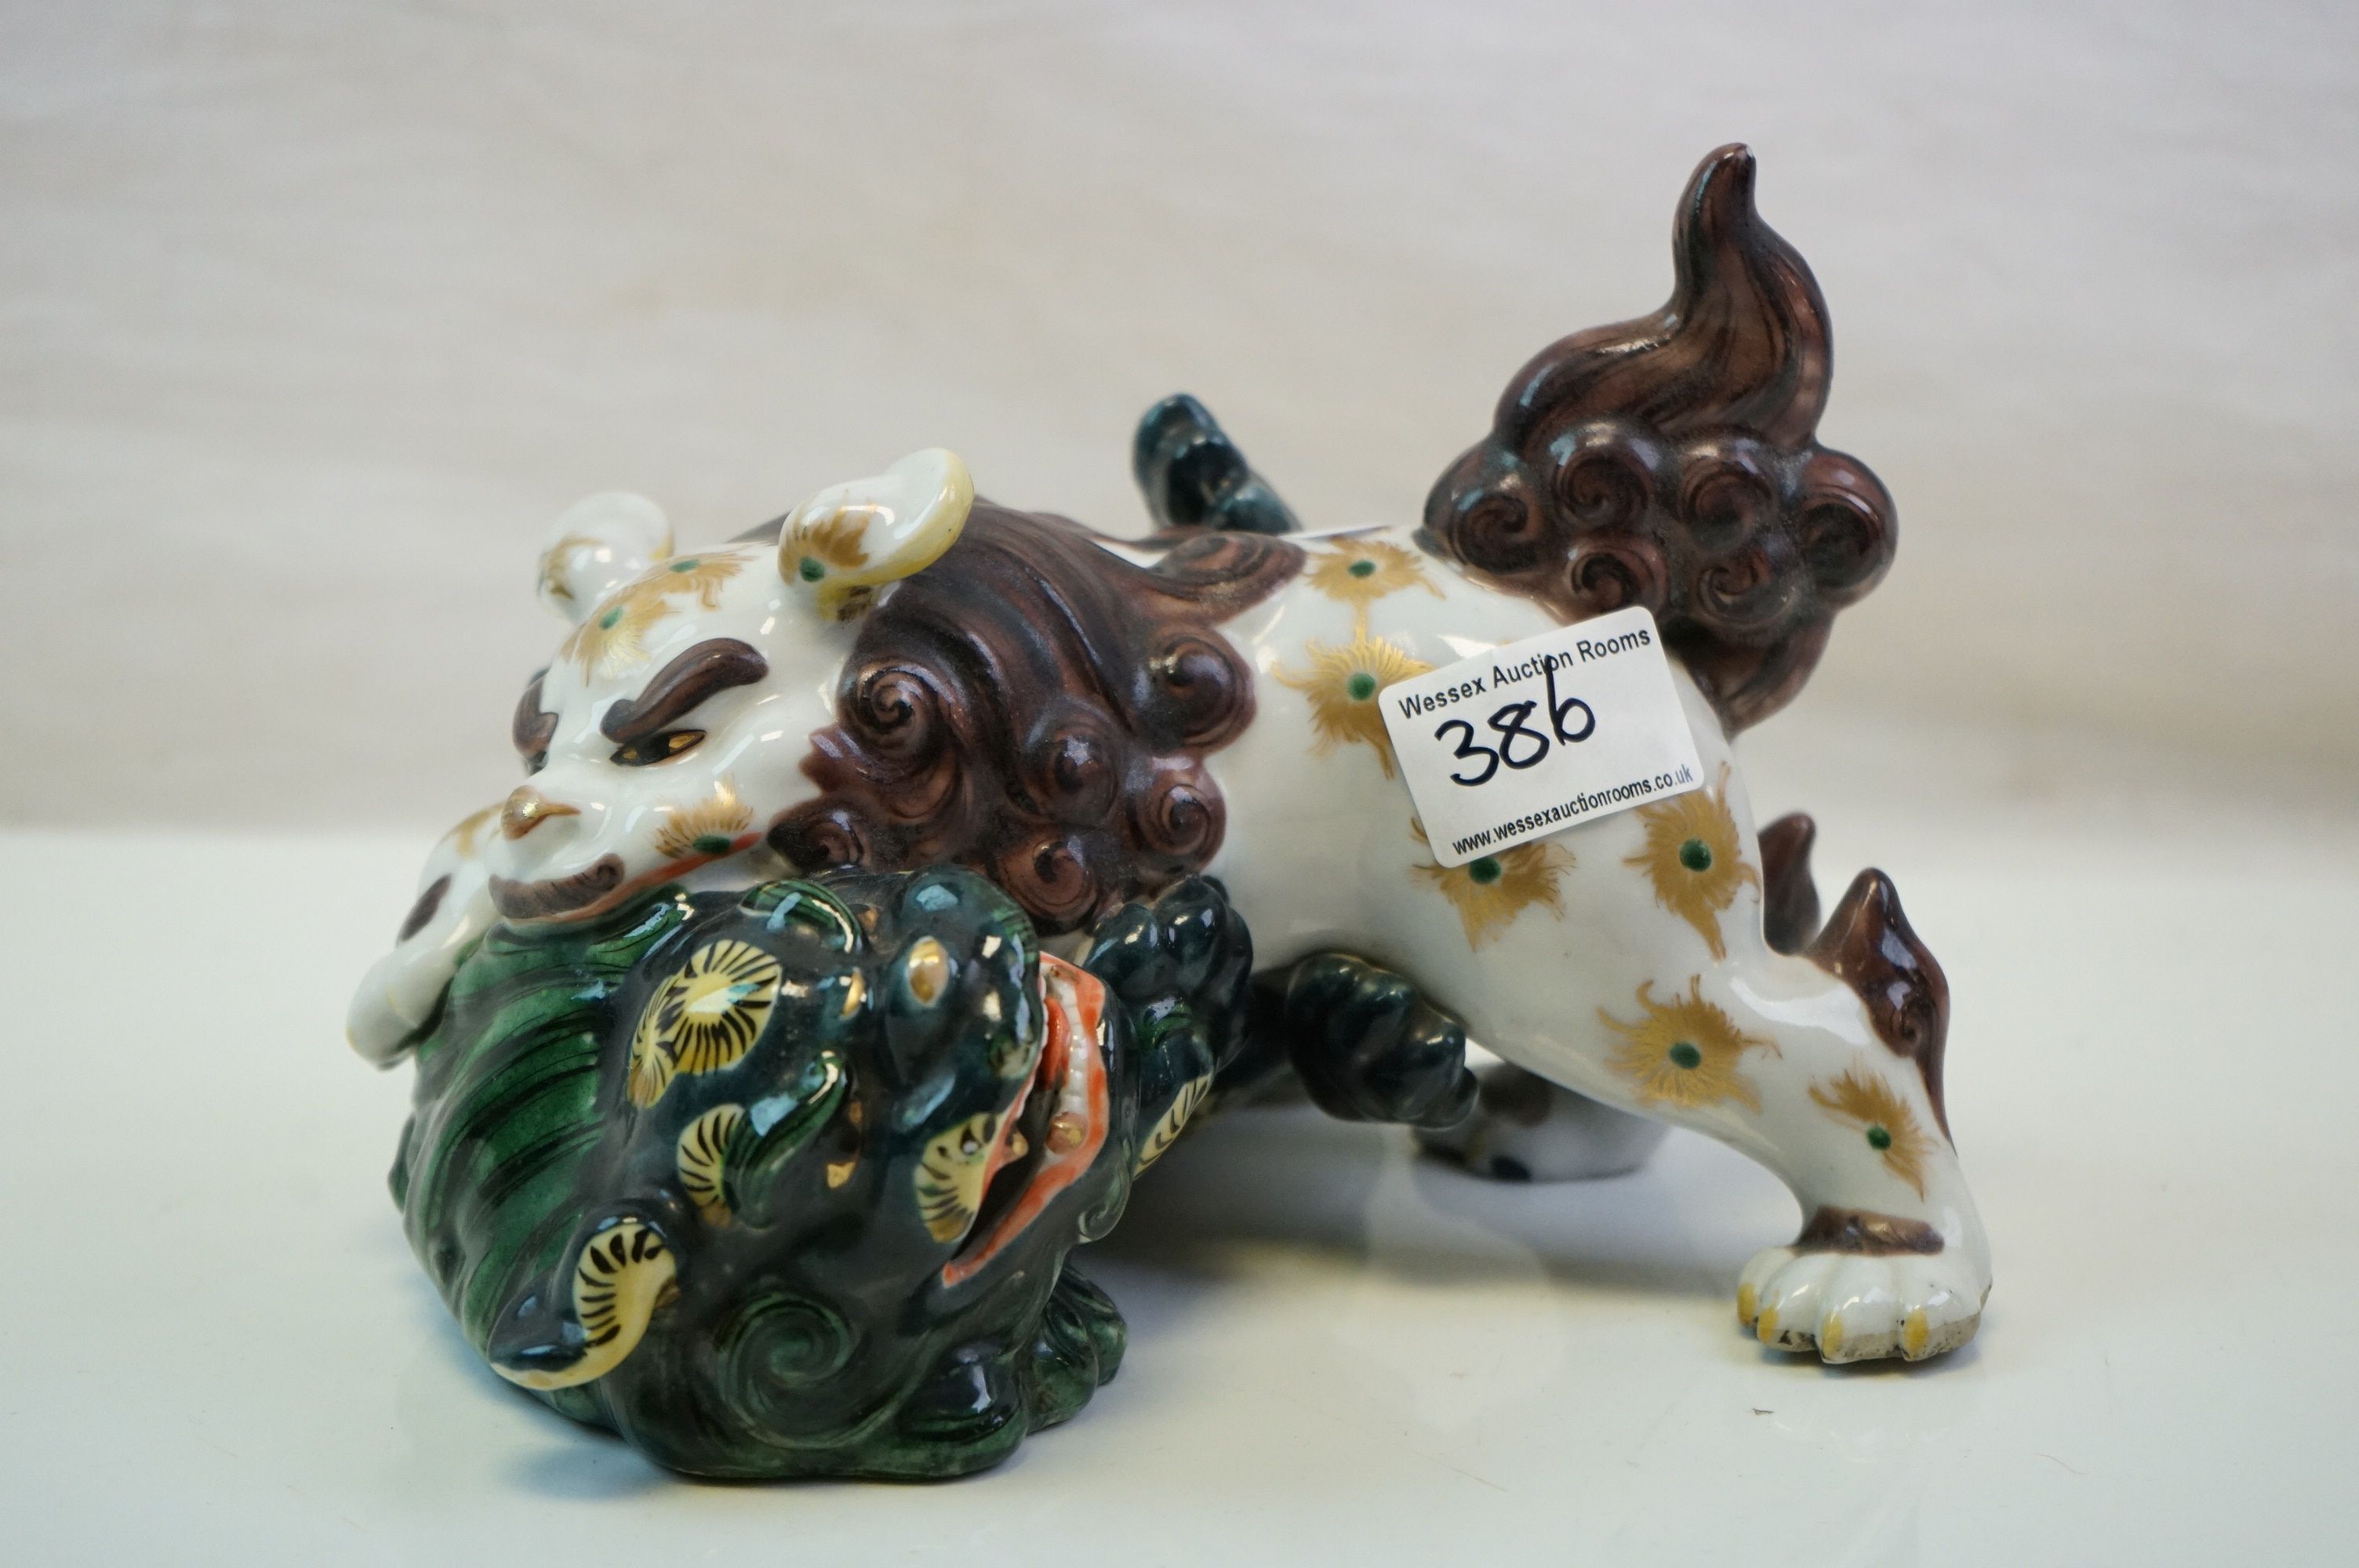 A ceramic Japanese figure of two lions fighting.